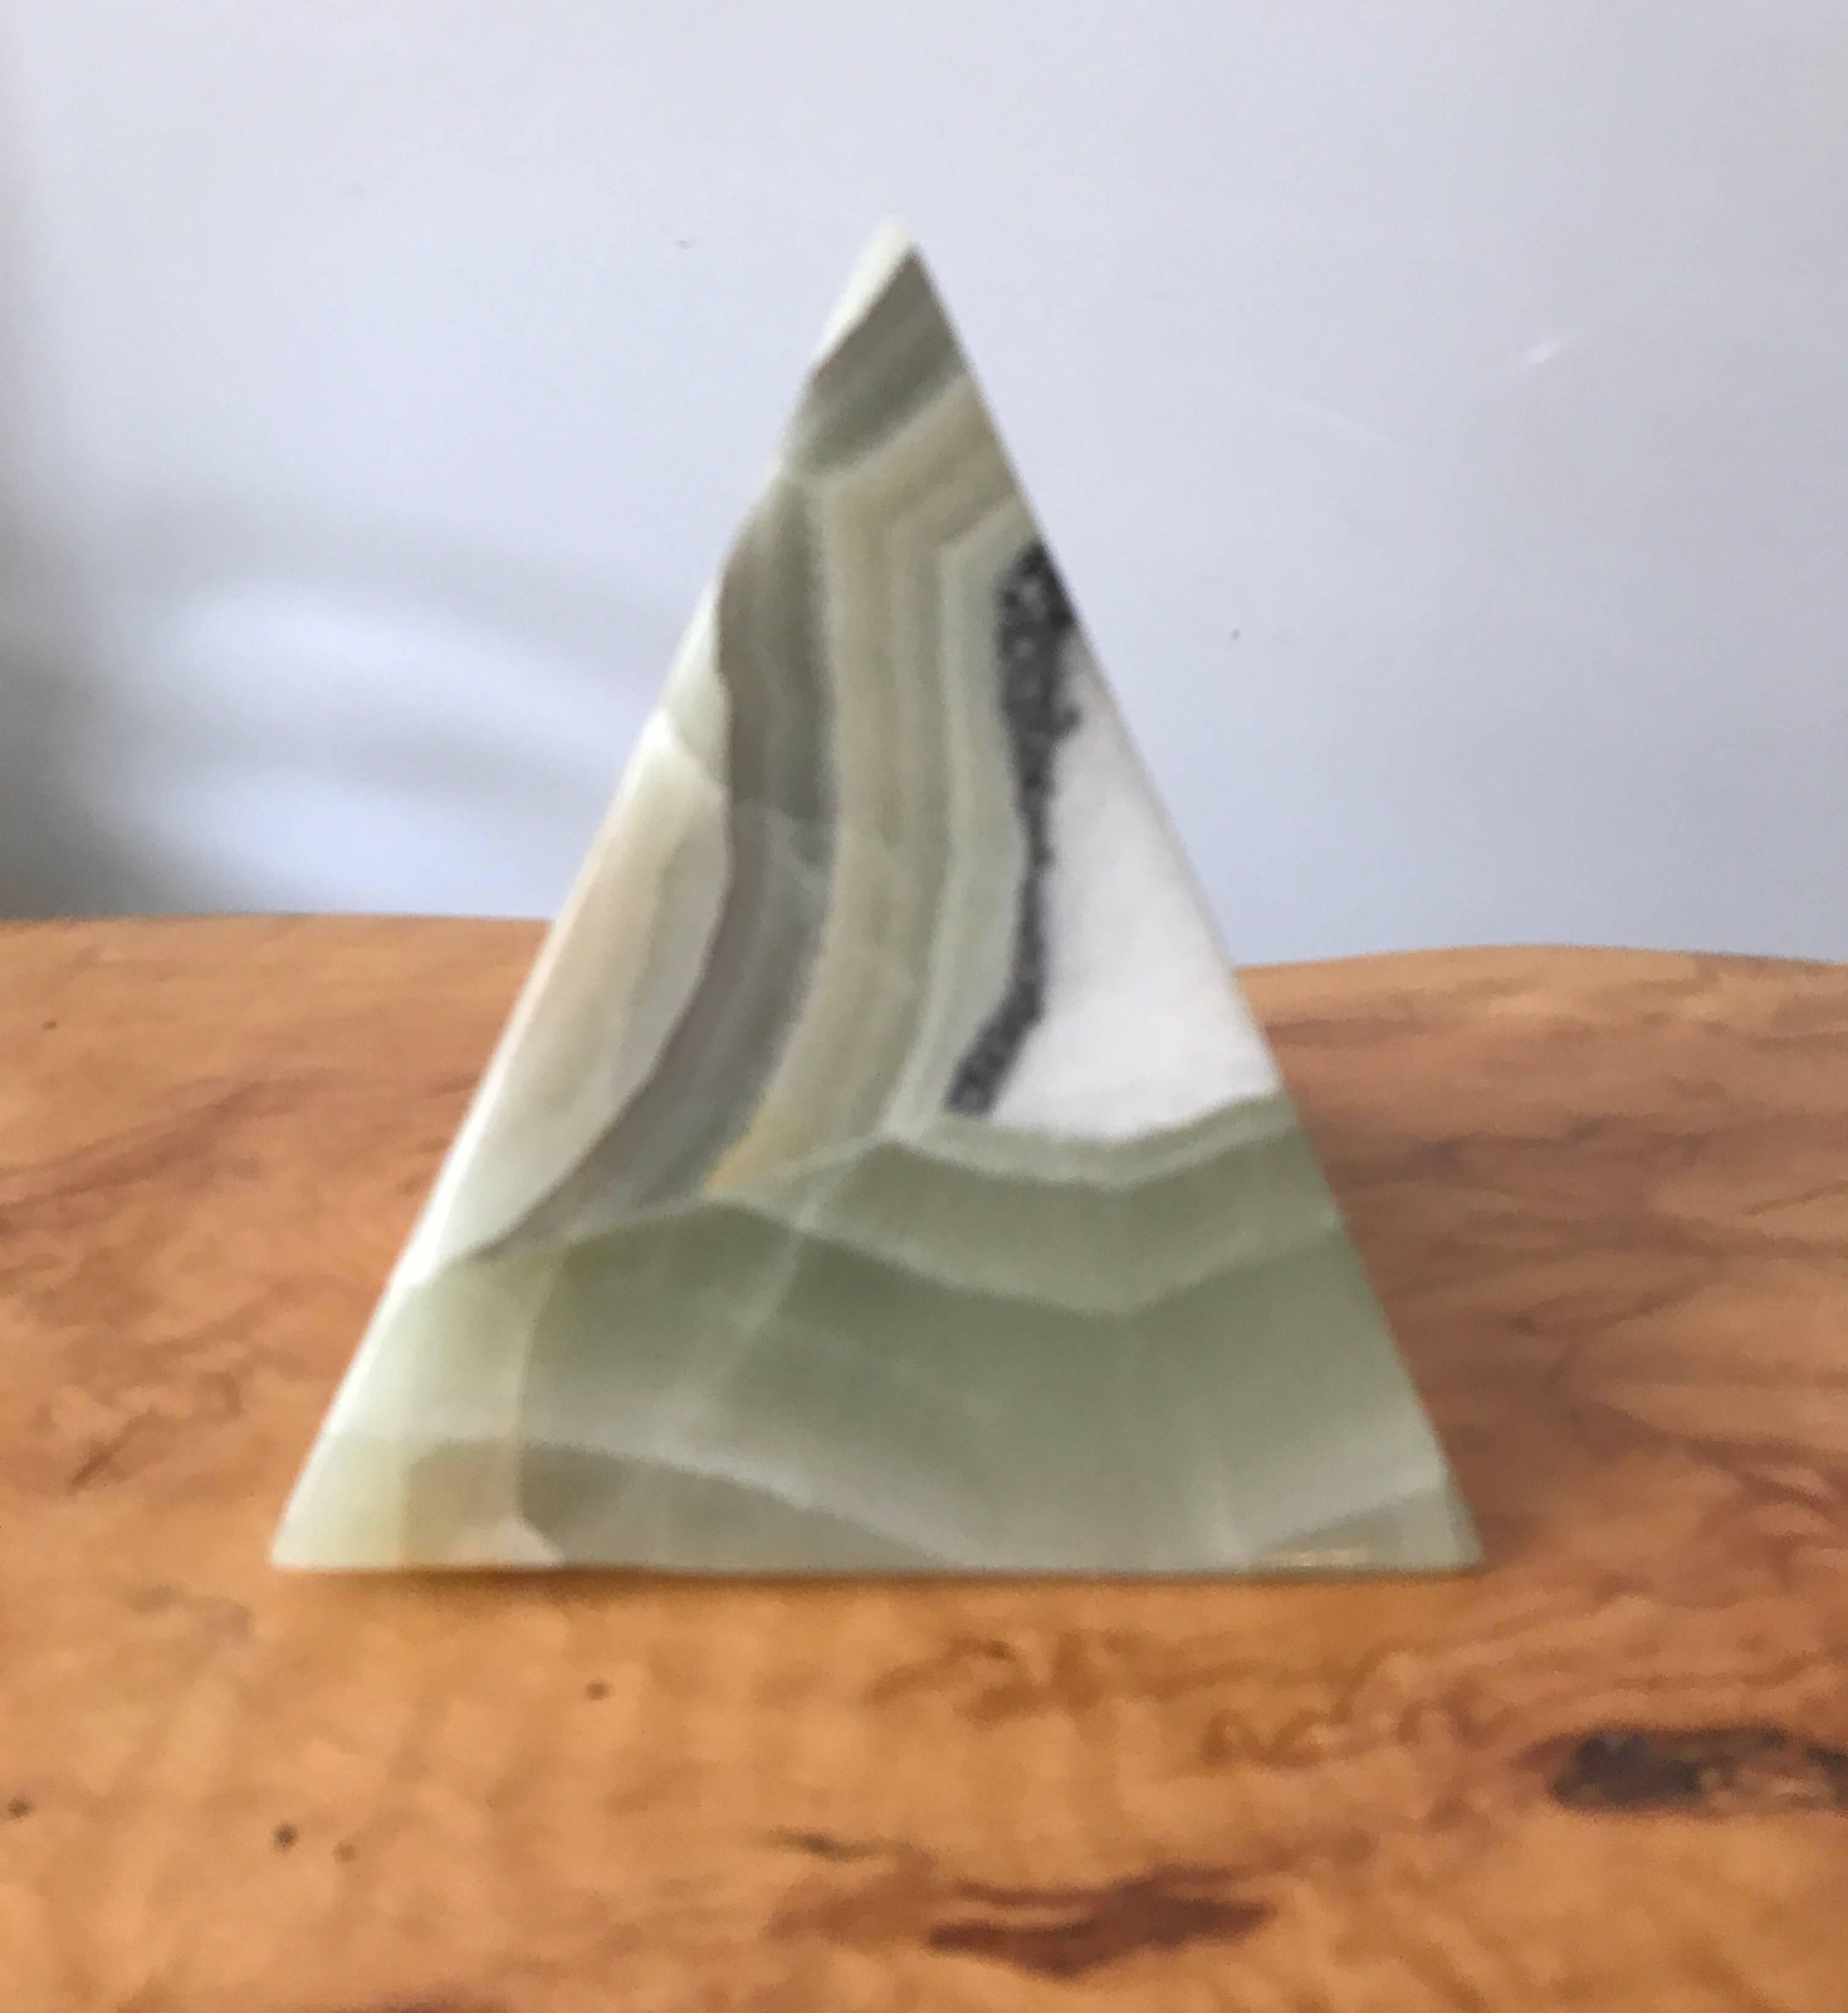 Late 20th Century Onyx Pyramid Decorative Tabletop Object